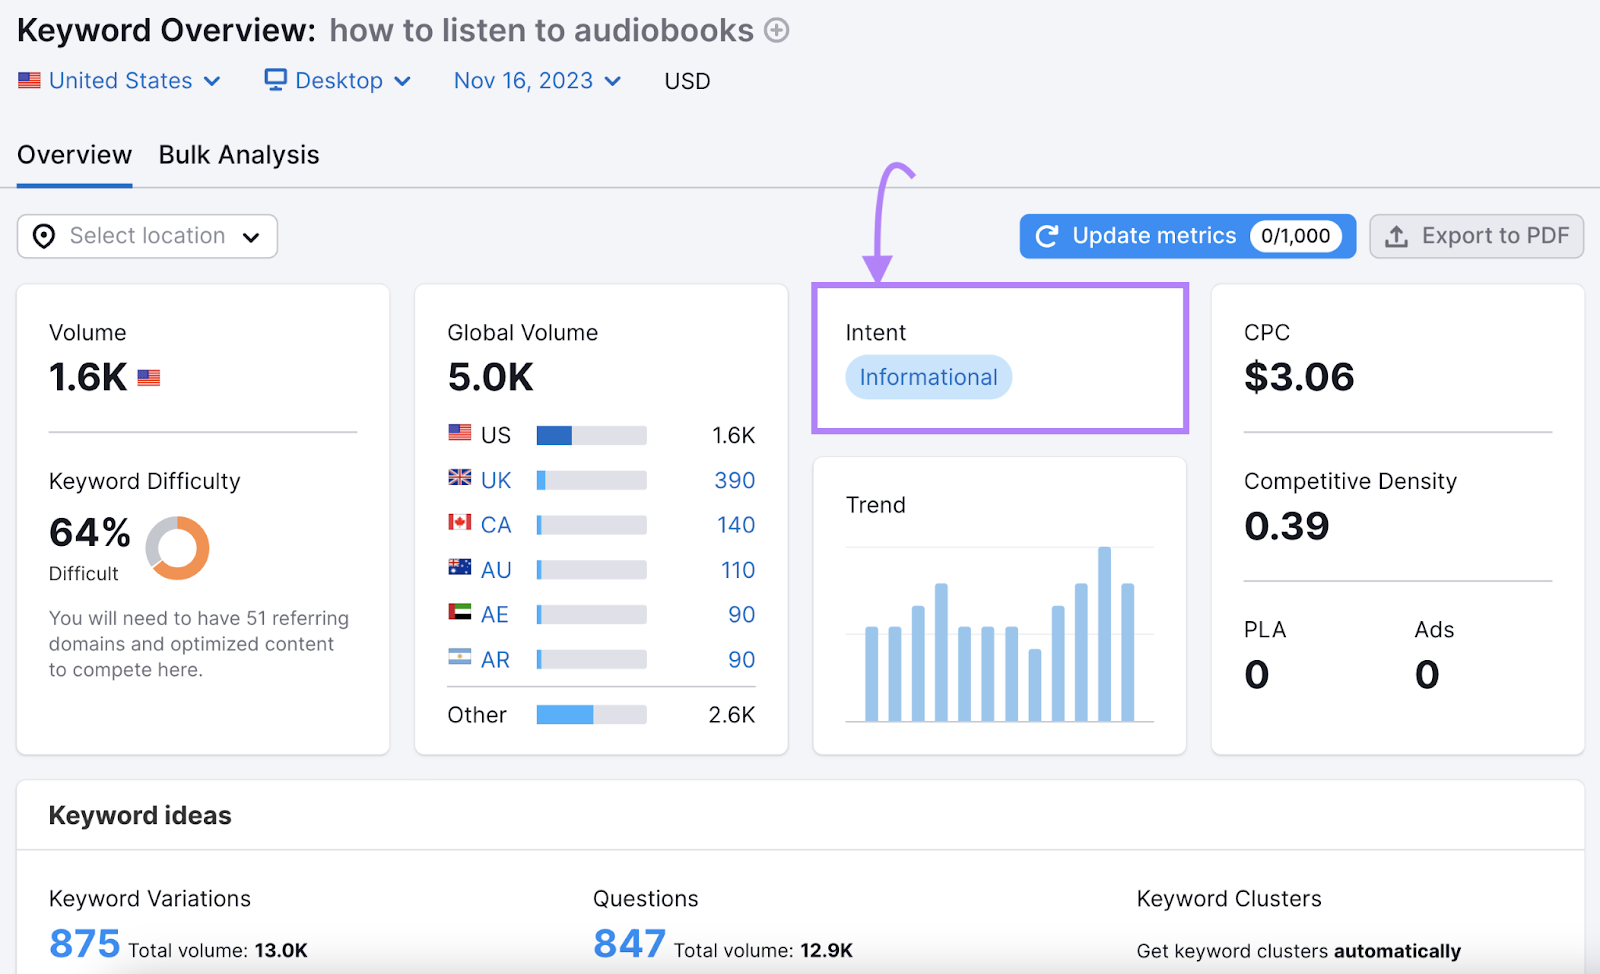 "how to listen to audiobooks" keyword shows "informational" intent in Keyword Overview tool